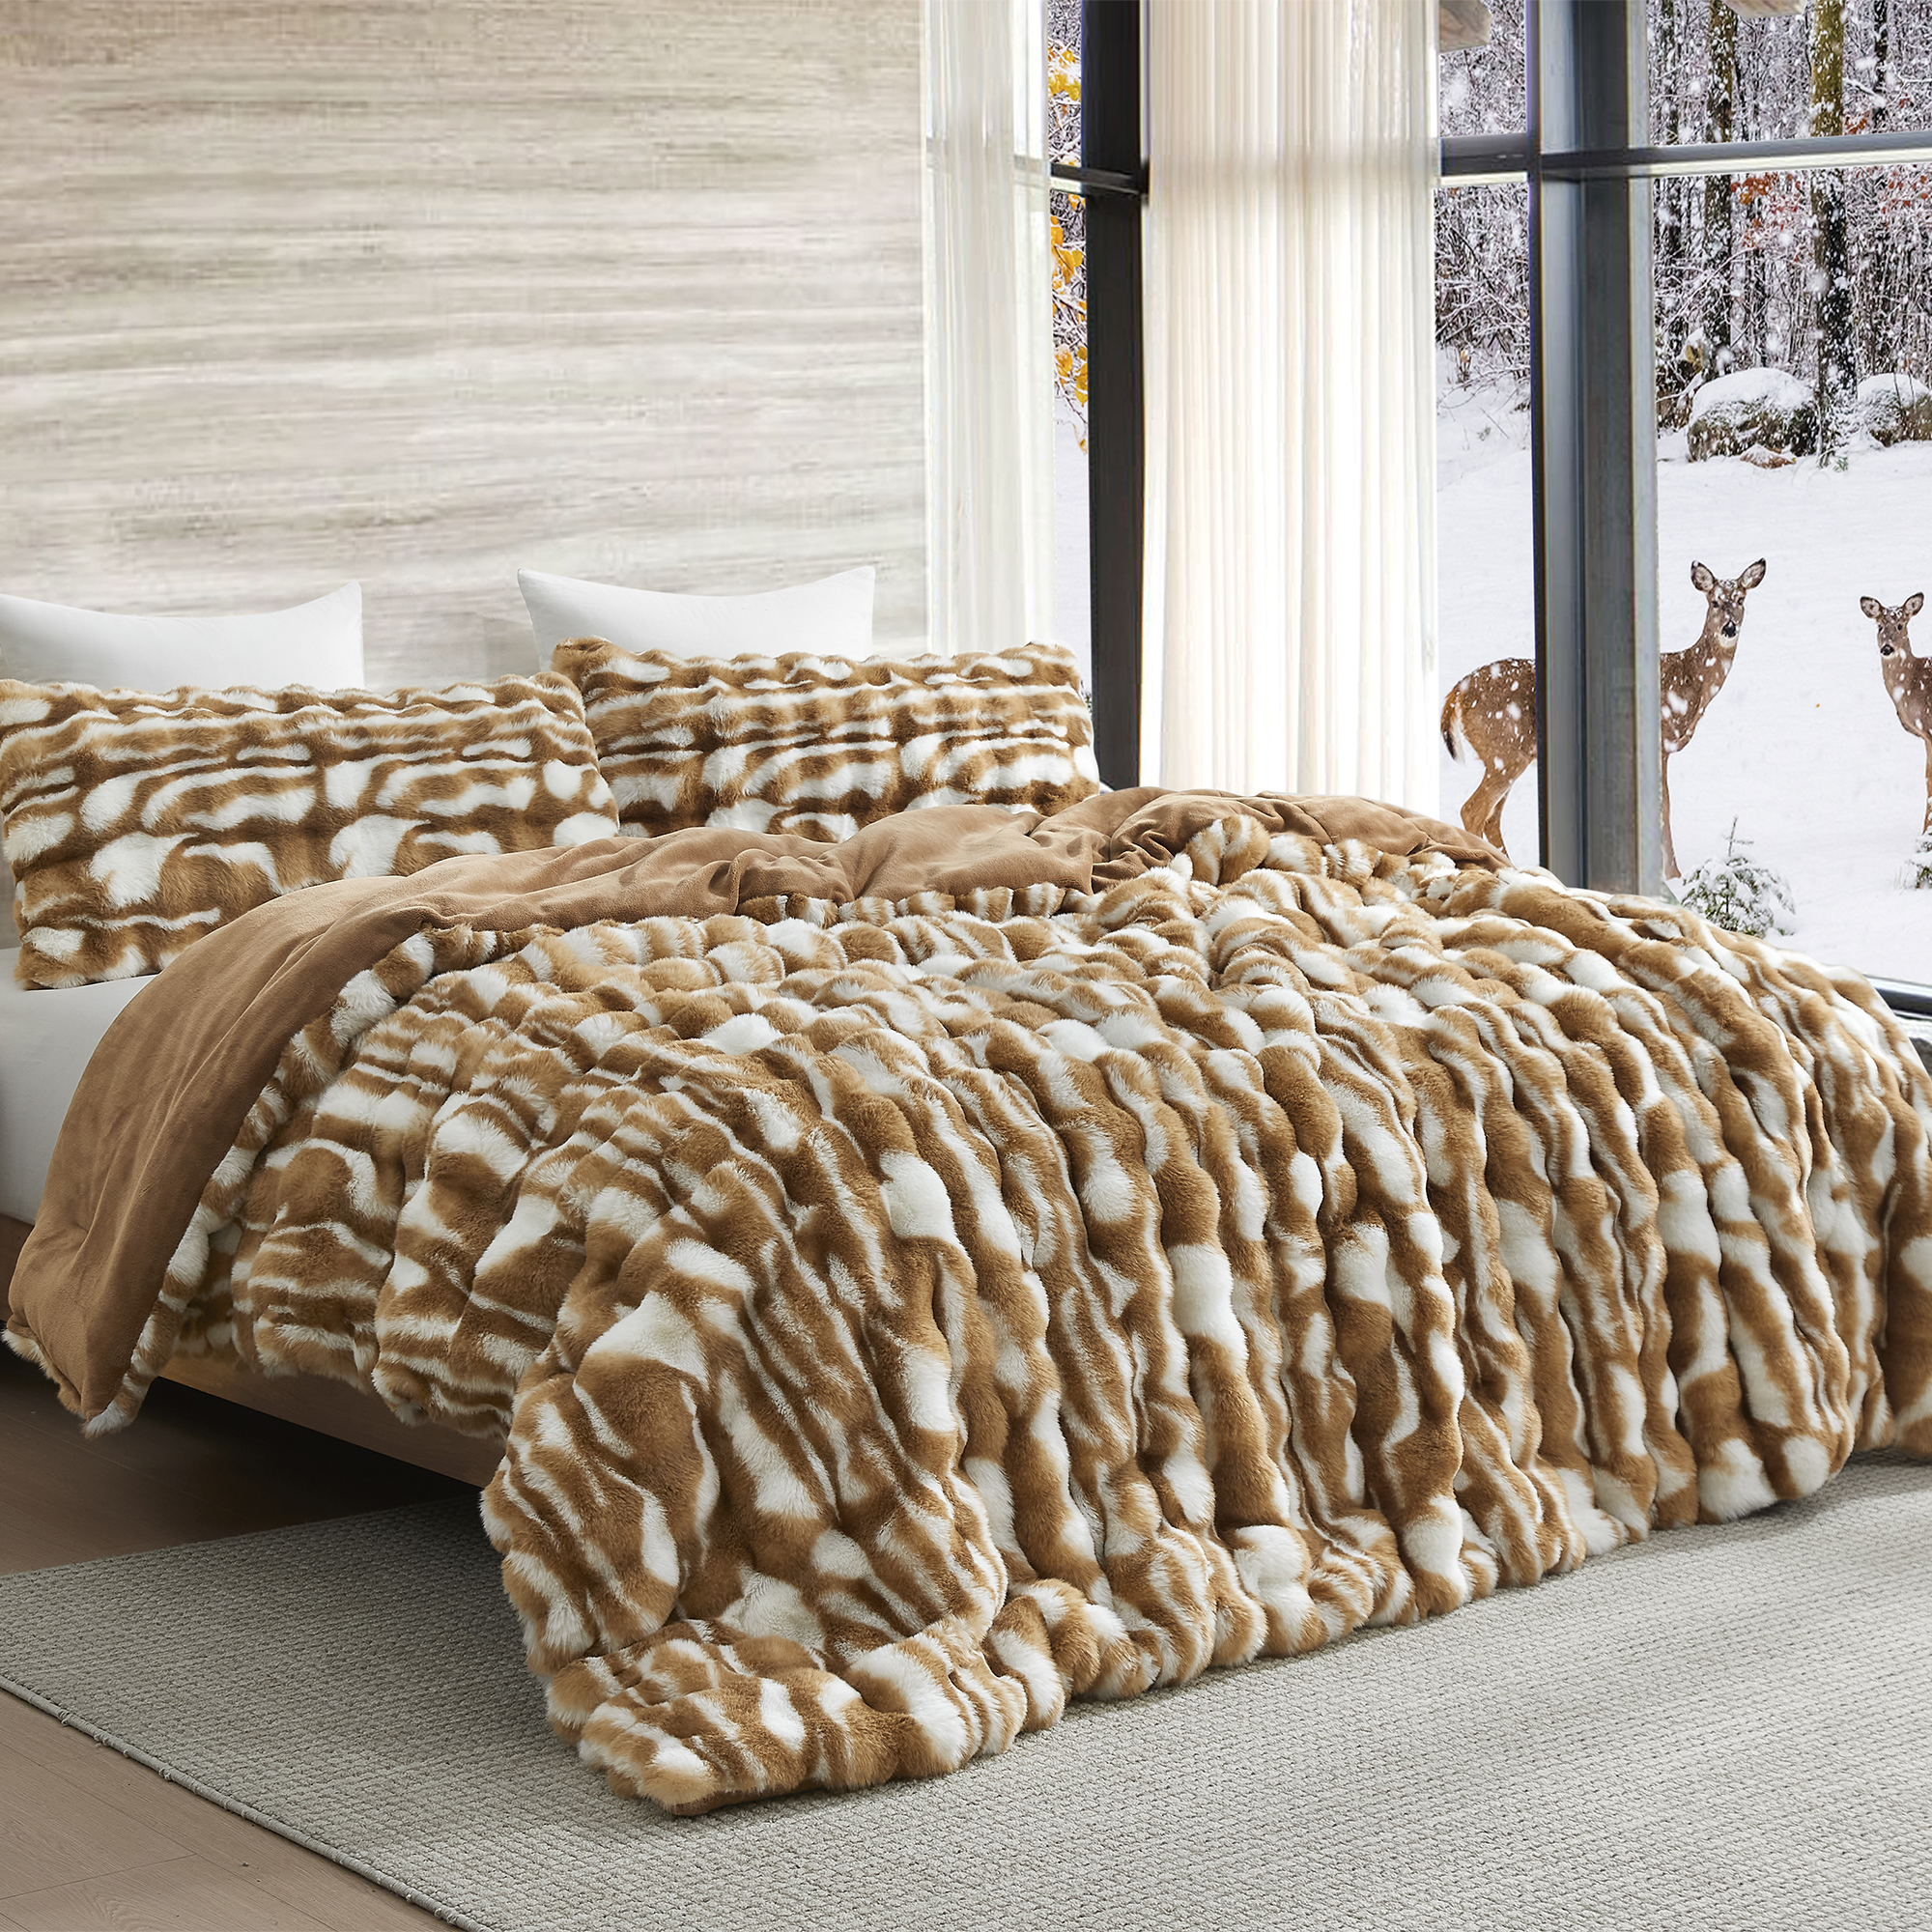 Oh Deer - Coma Inducer® Oversized Queen Comforter - Fawn Brown